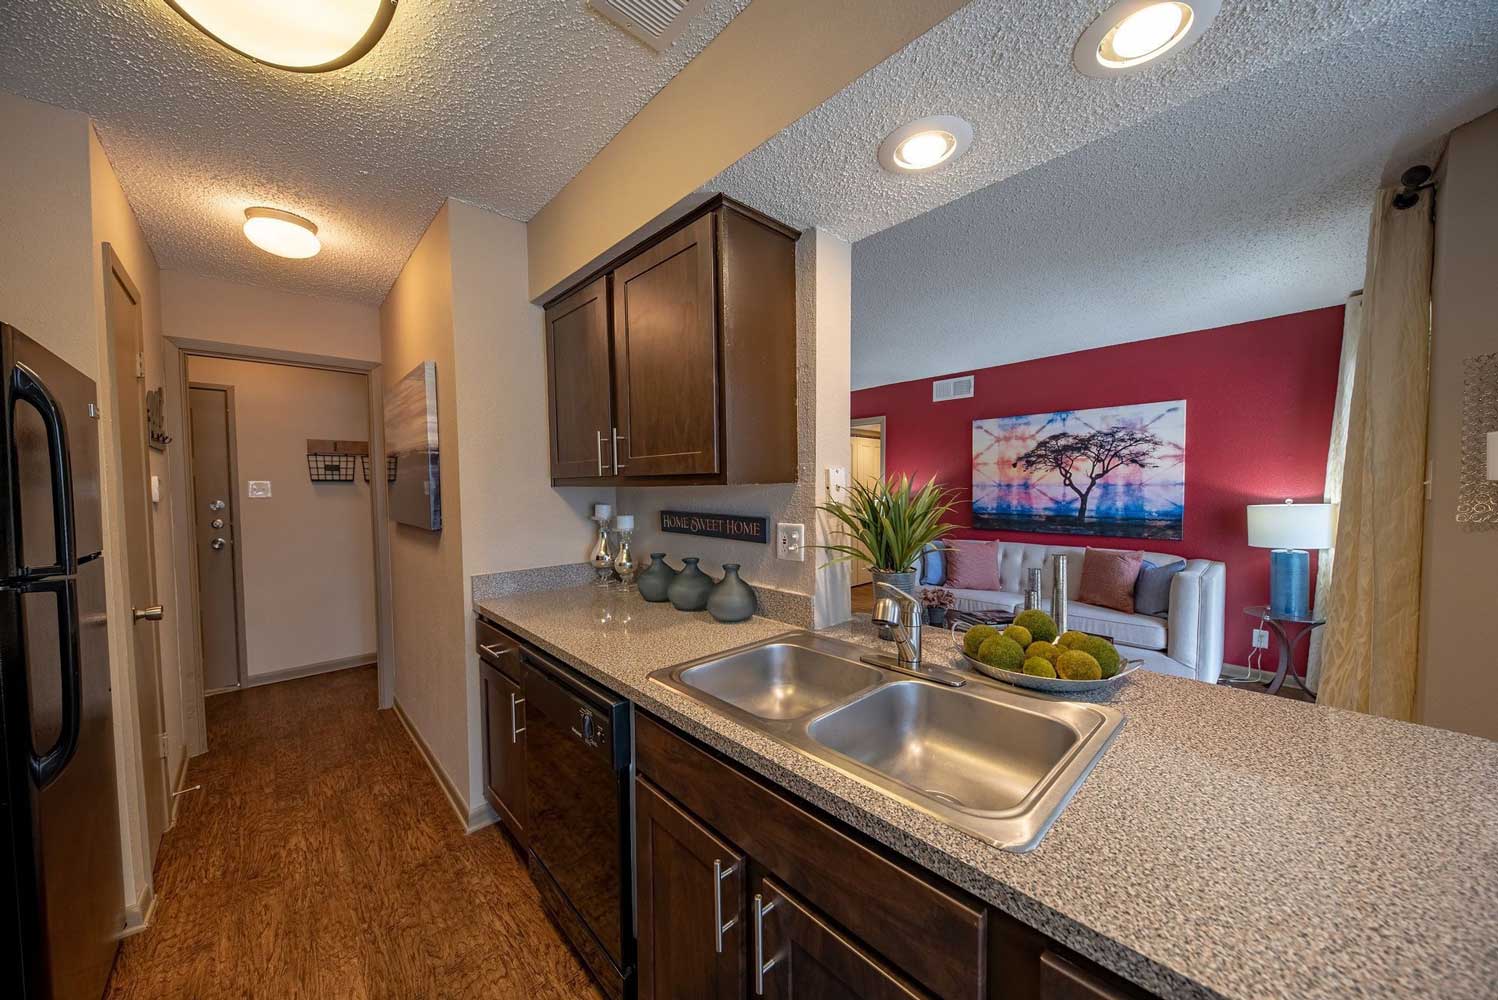 Expansive Countertops at Ridgeview Place Apartments in Irving, TX